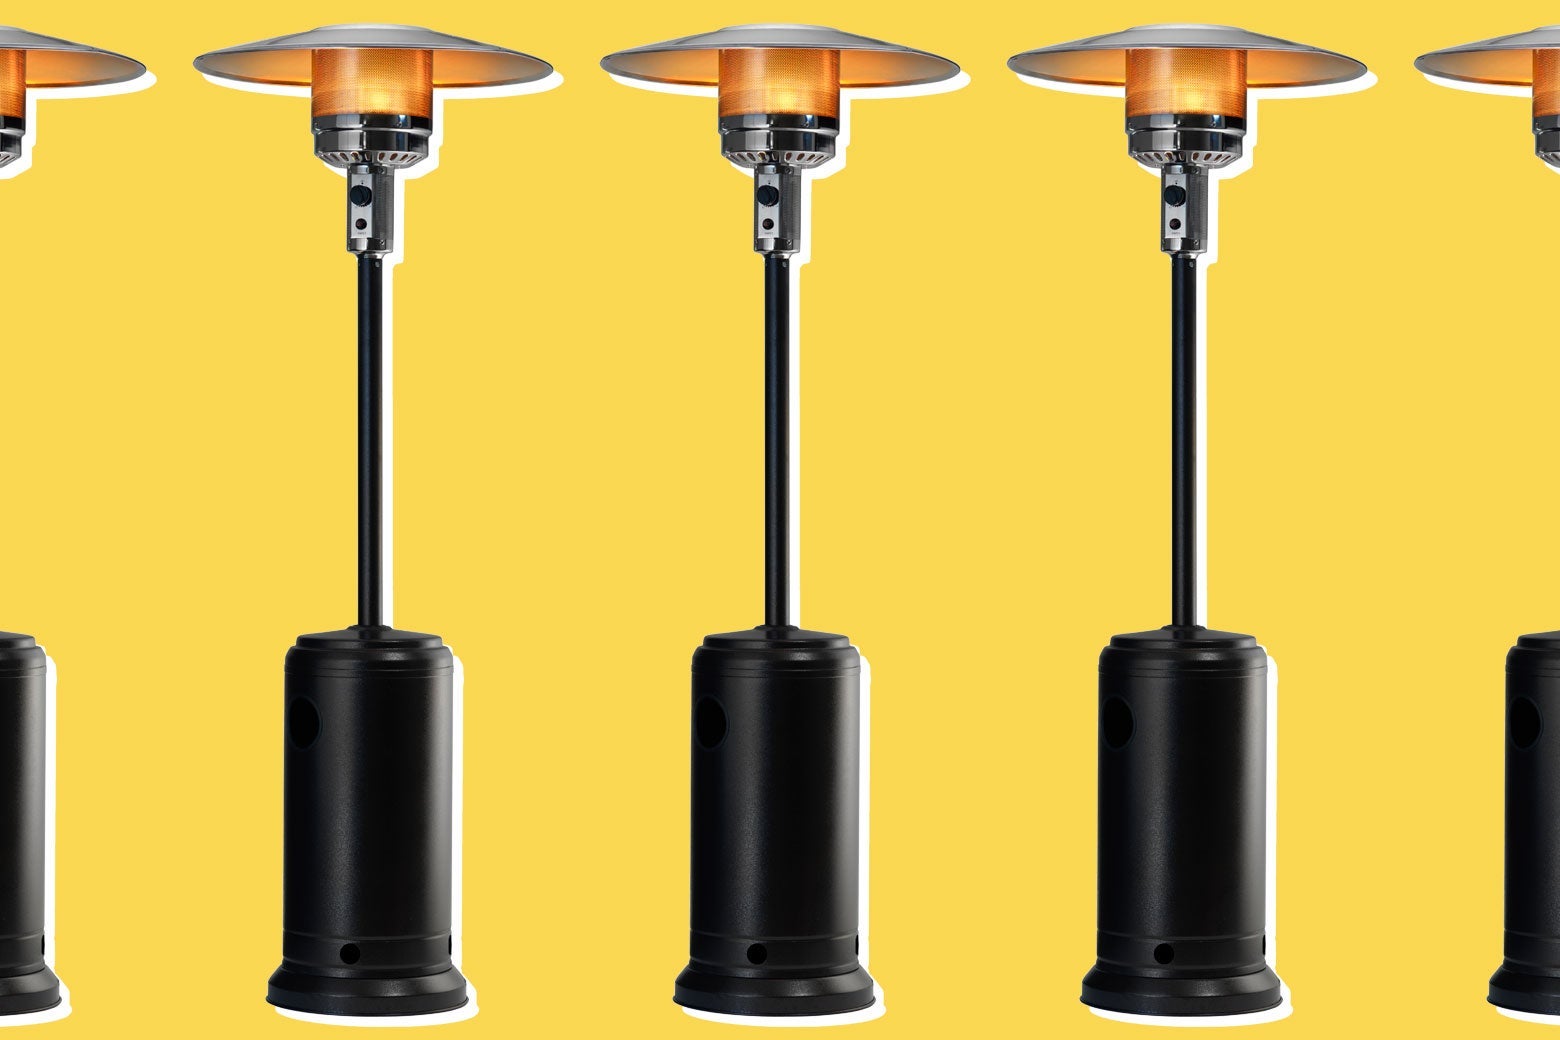 A row of patio heaters